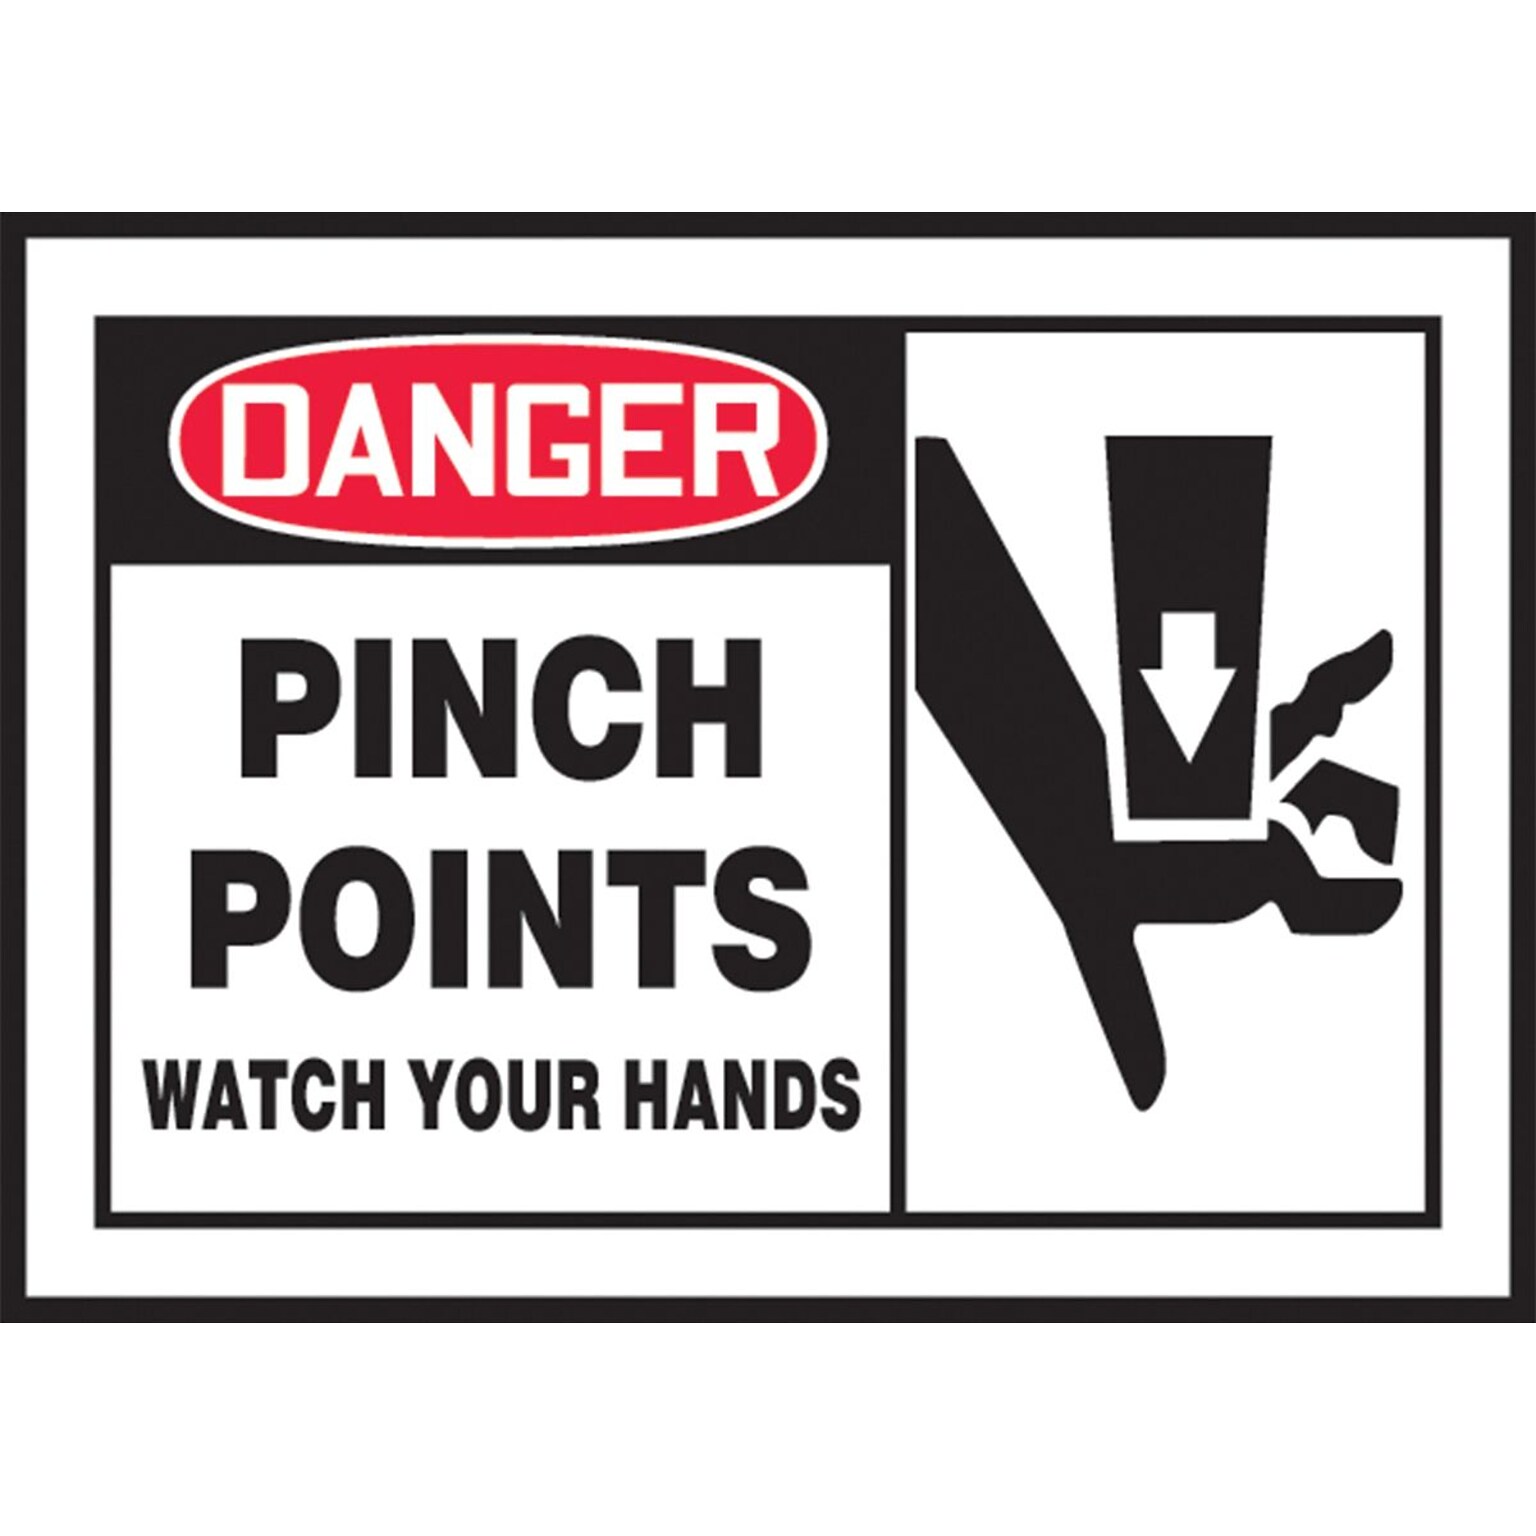 Accuform Safety Label, DANGER PINCH POINTS WATCH YOUR HANDS, 3 1/2 x 5, Adhesive Vinyl, 5/Pack (LEQM017VSP)